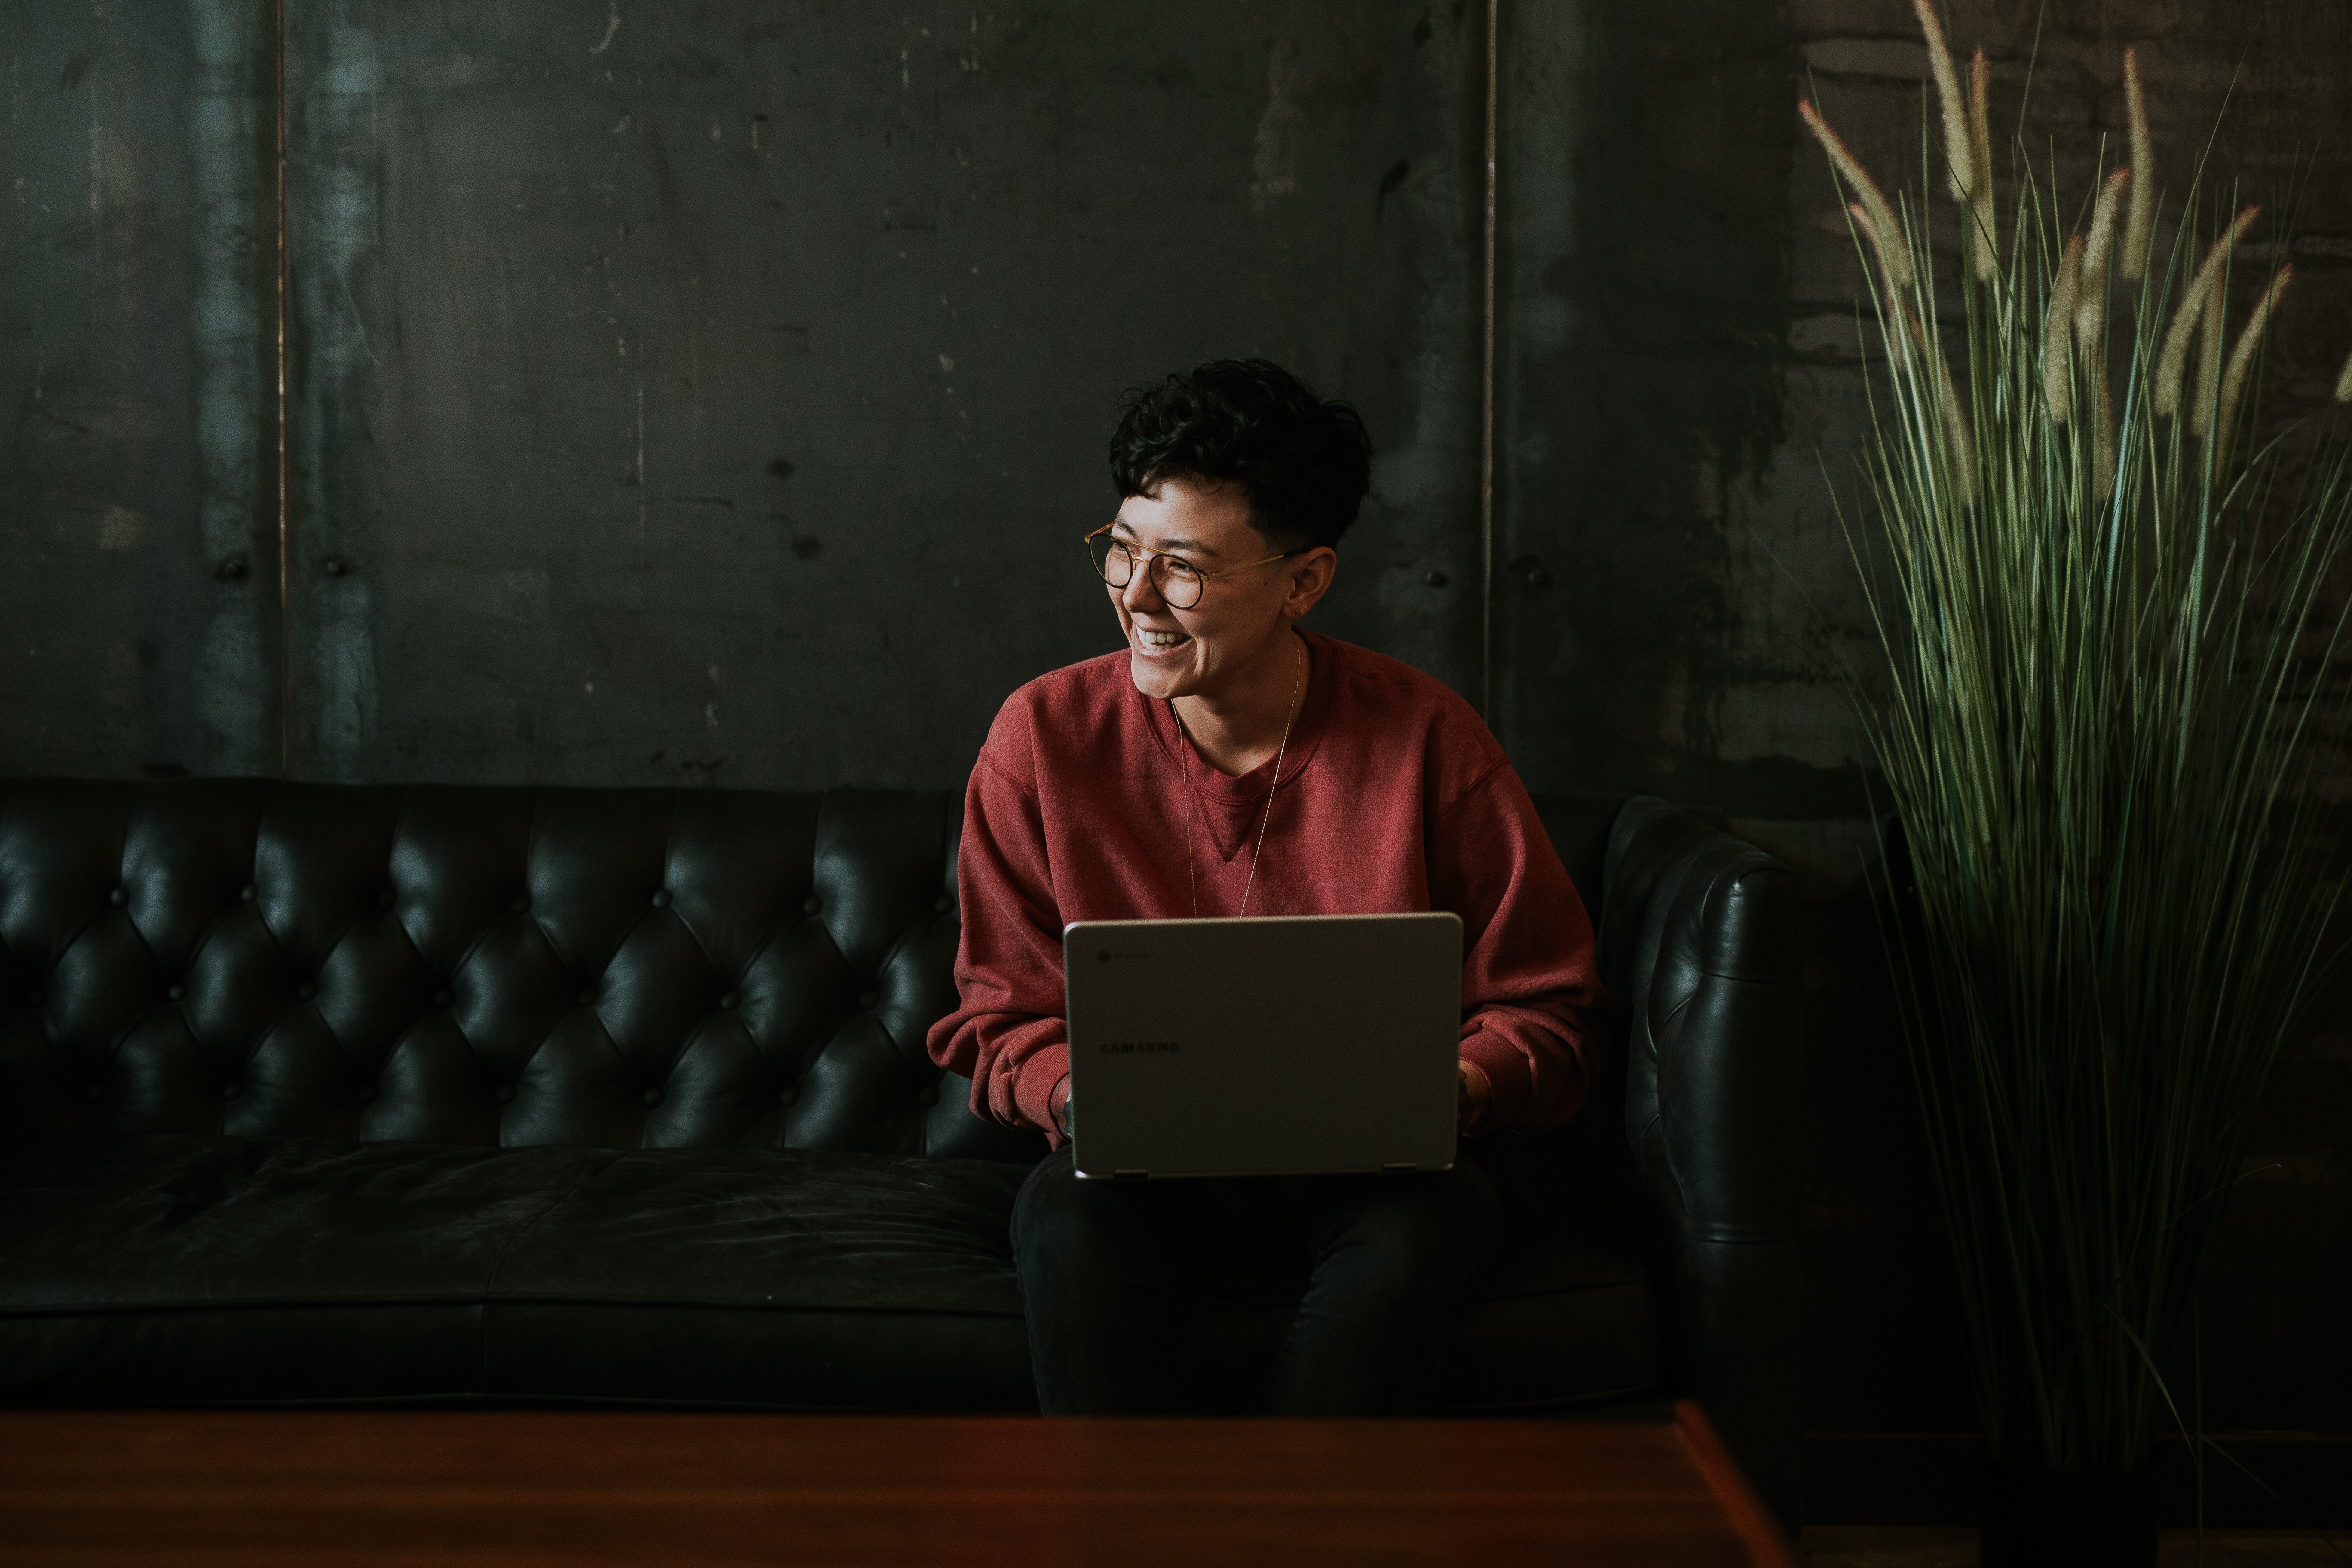 A woman with short hair and glasses smiles while sitting on a leather sofa with a laptop